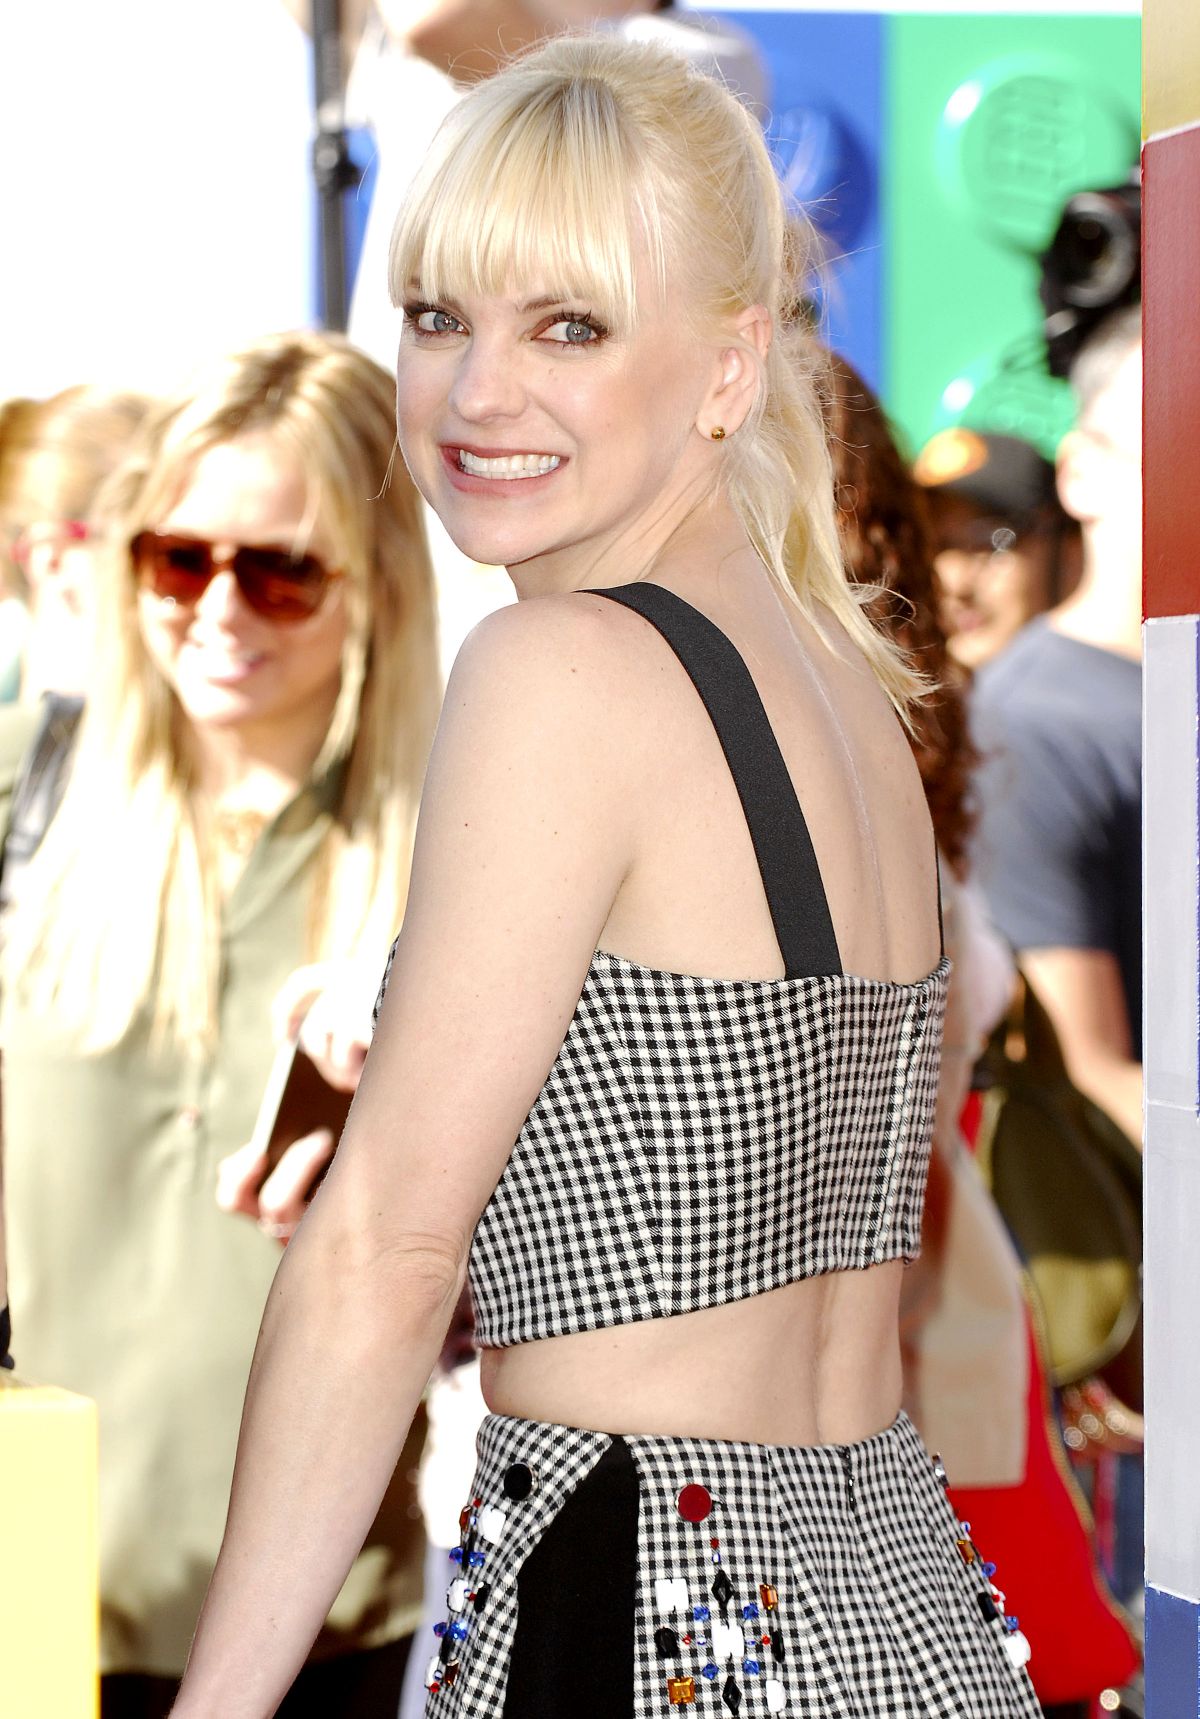 ANNA FARIS at The Lego Movie Premiere in Los Angeles.